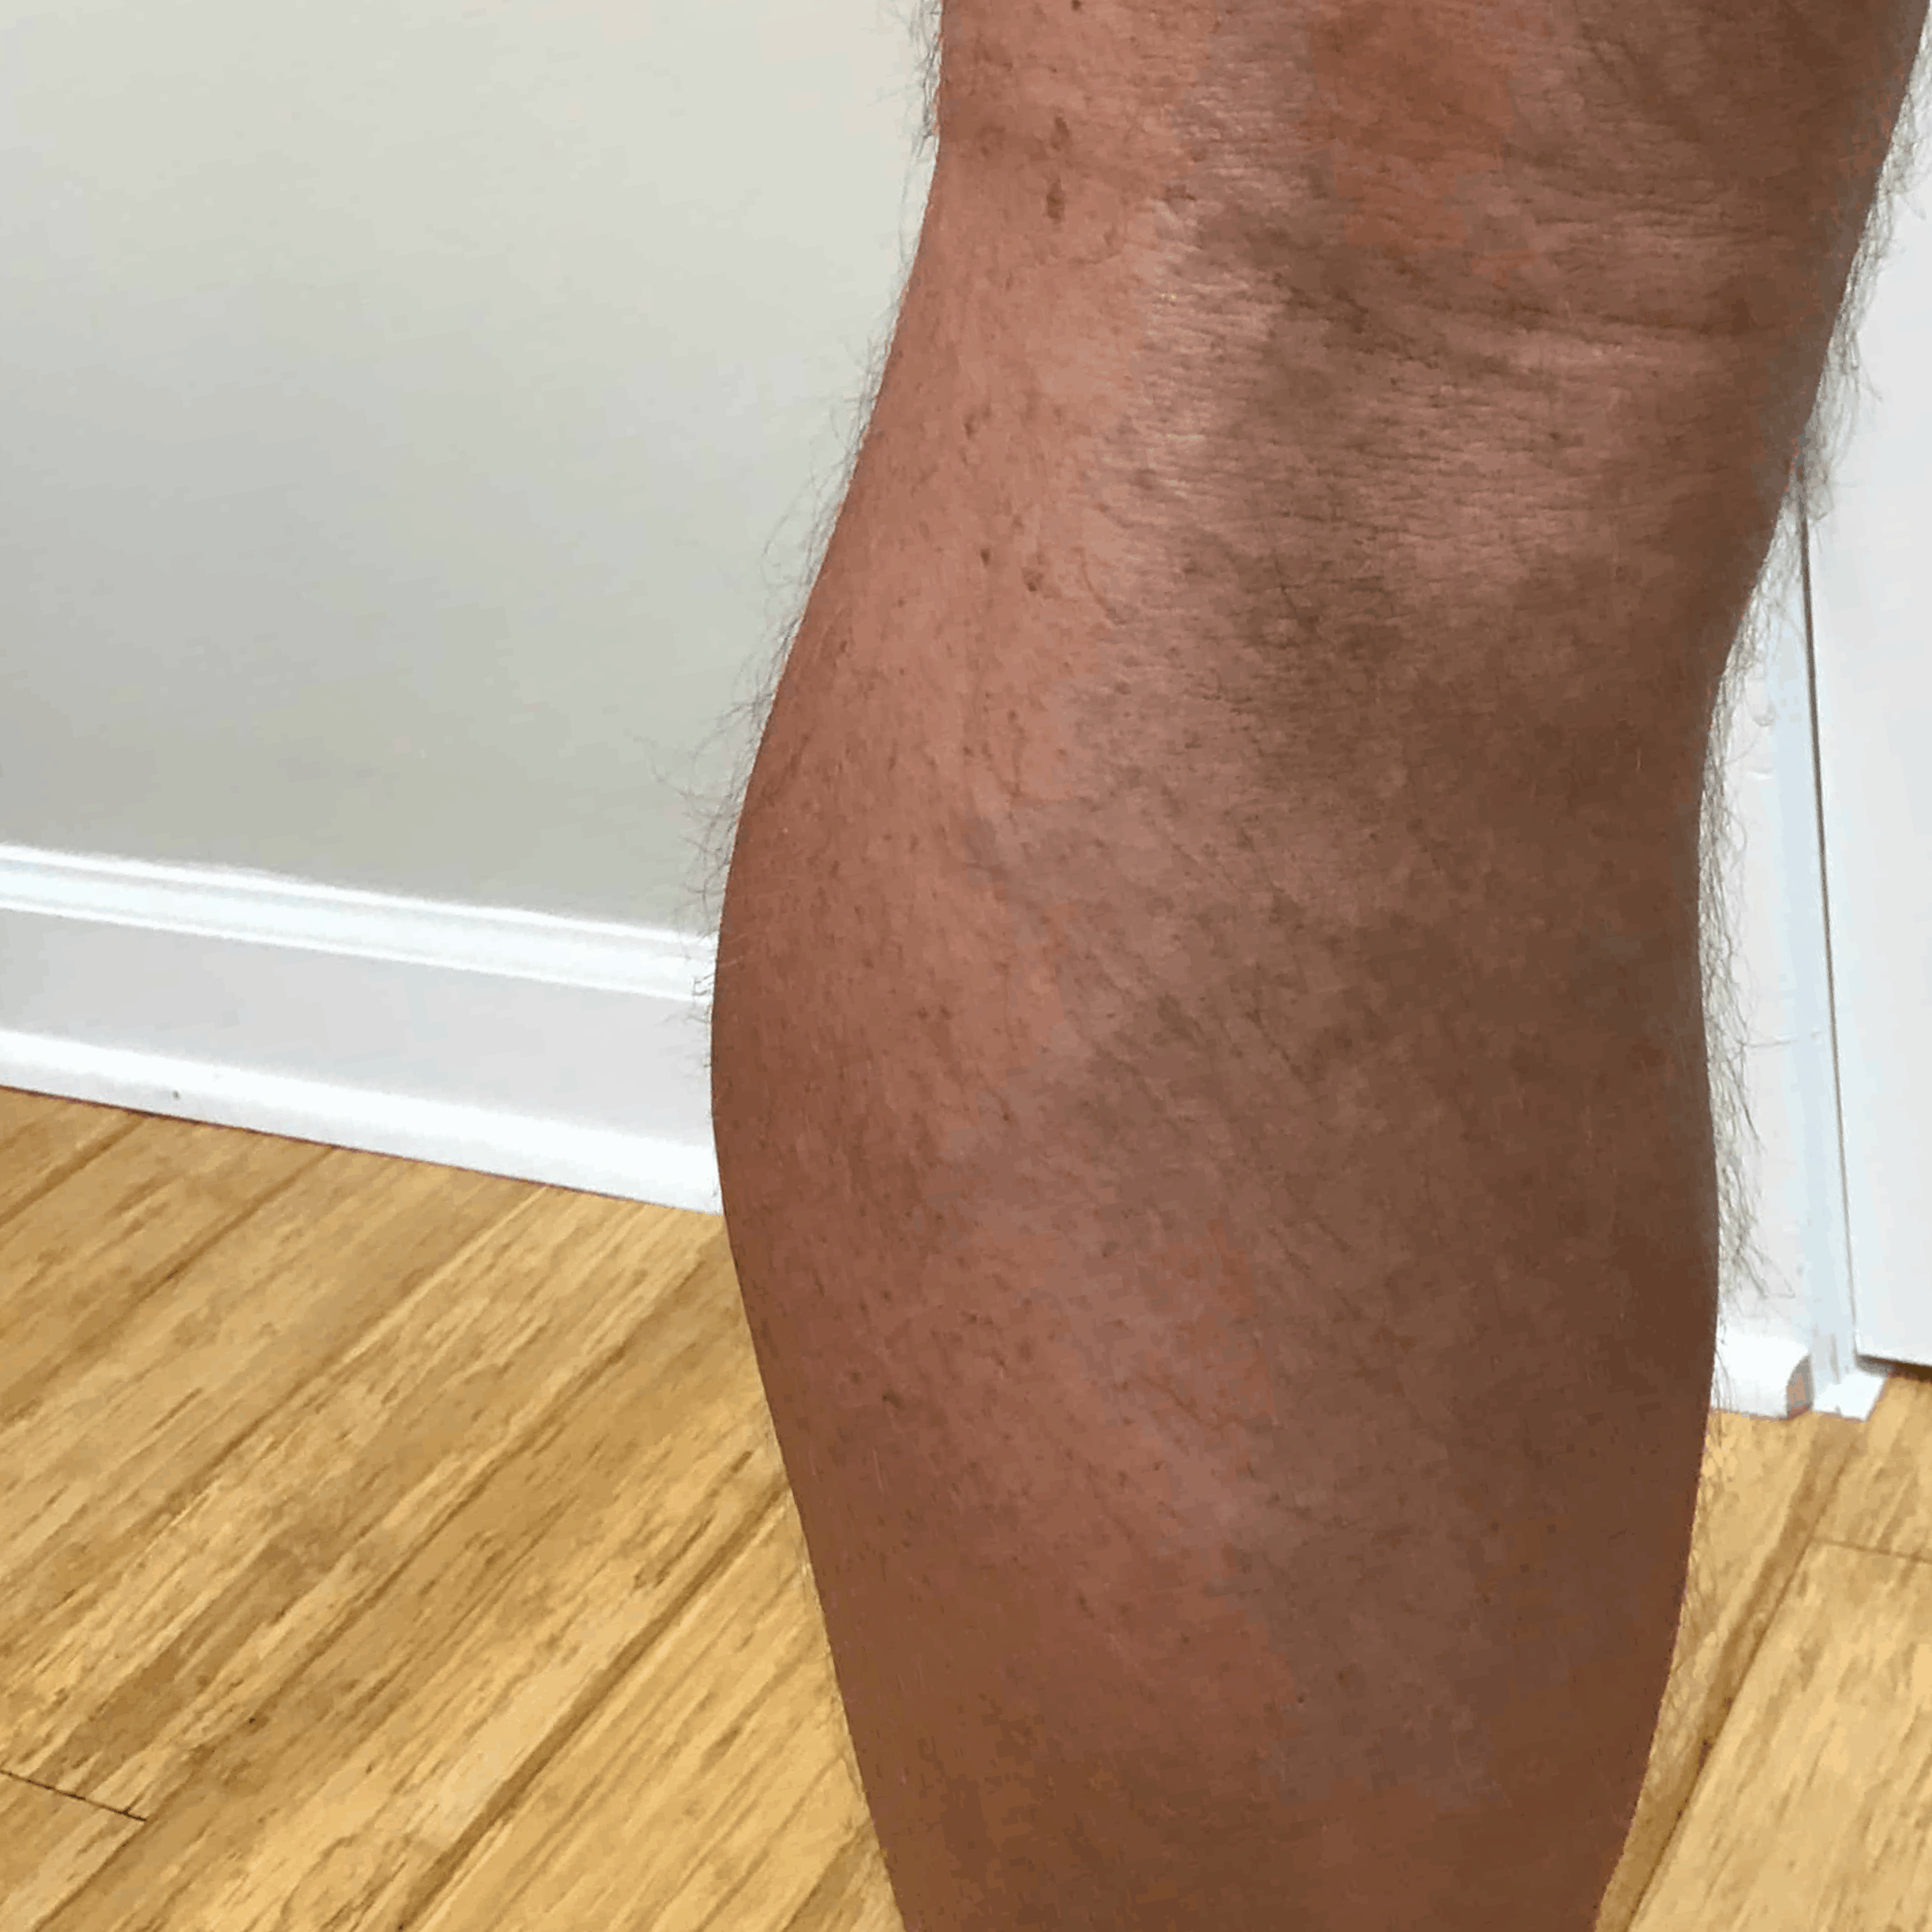 What is Venous Insufficiency? - Vein Care Center of Amelia Island